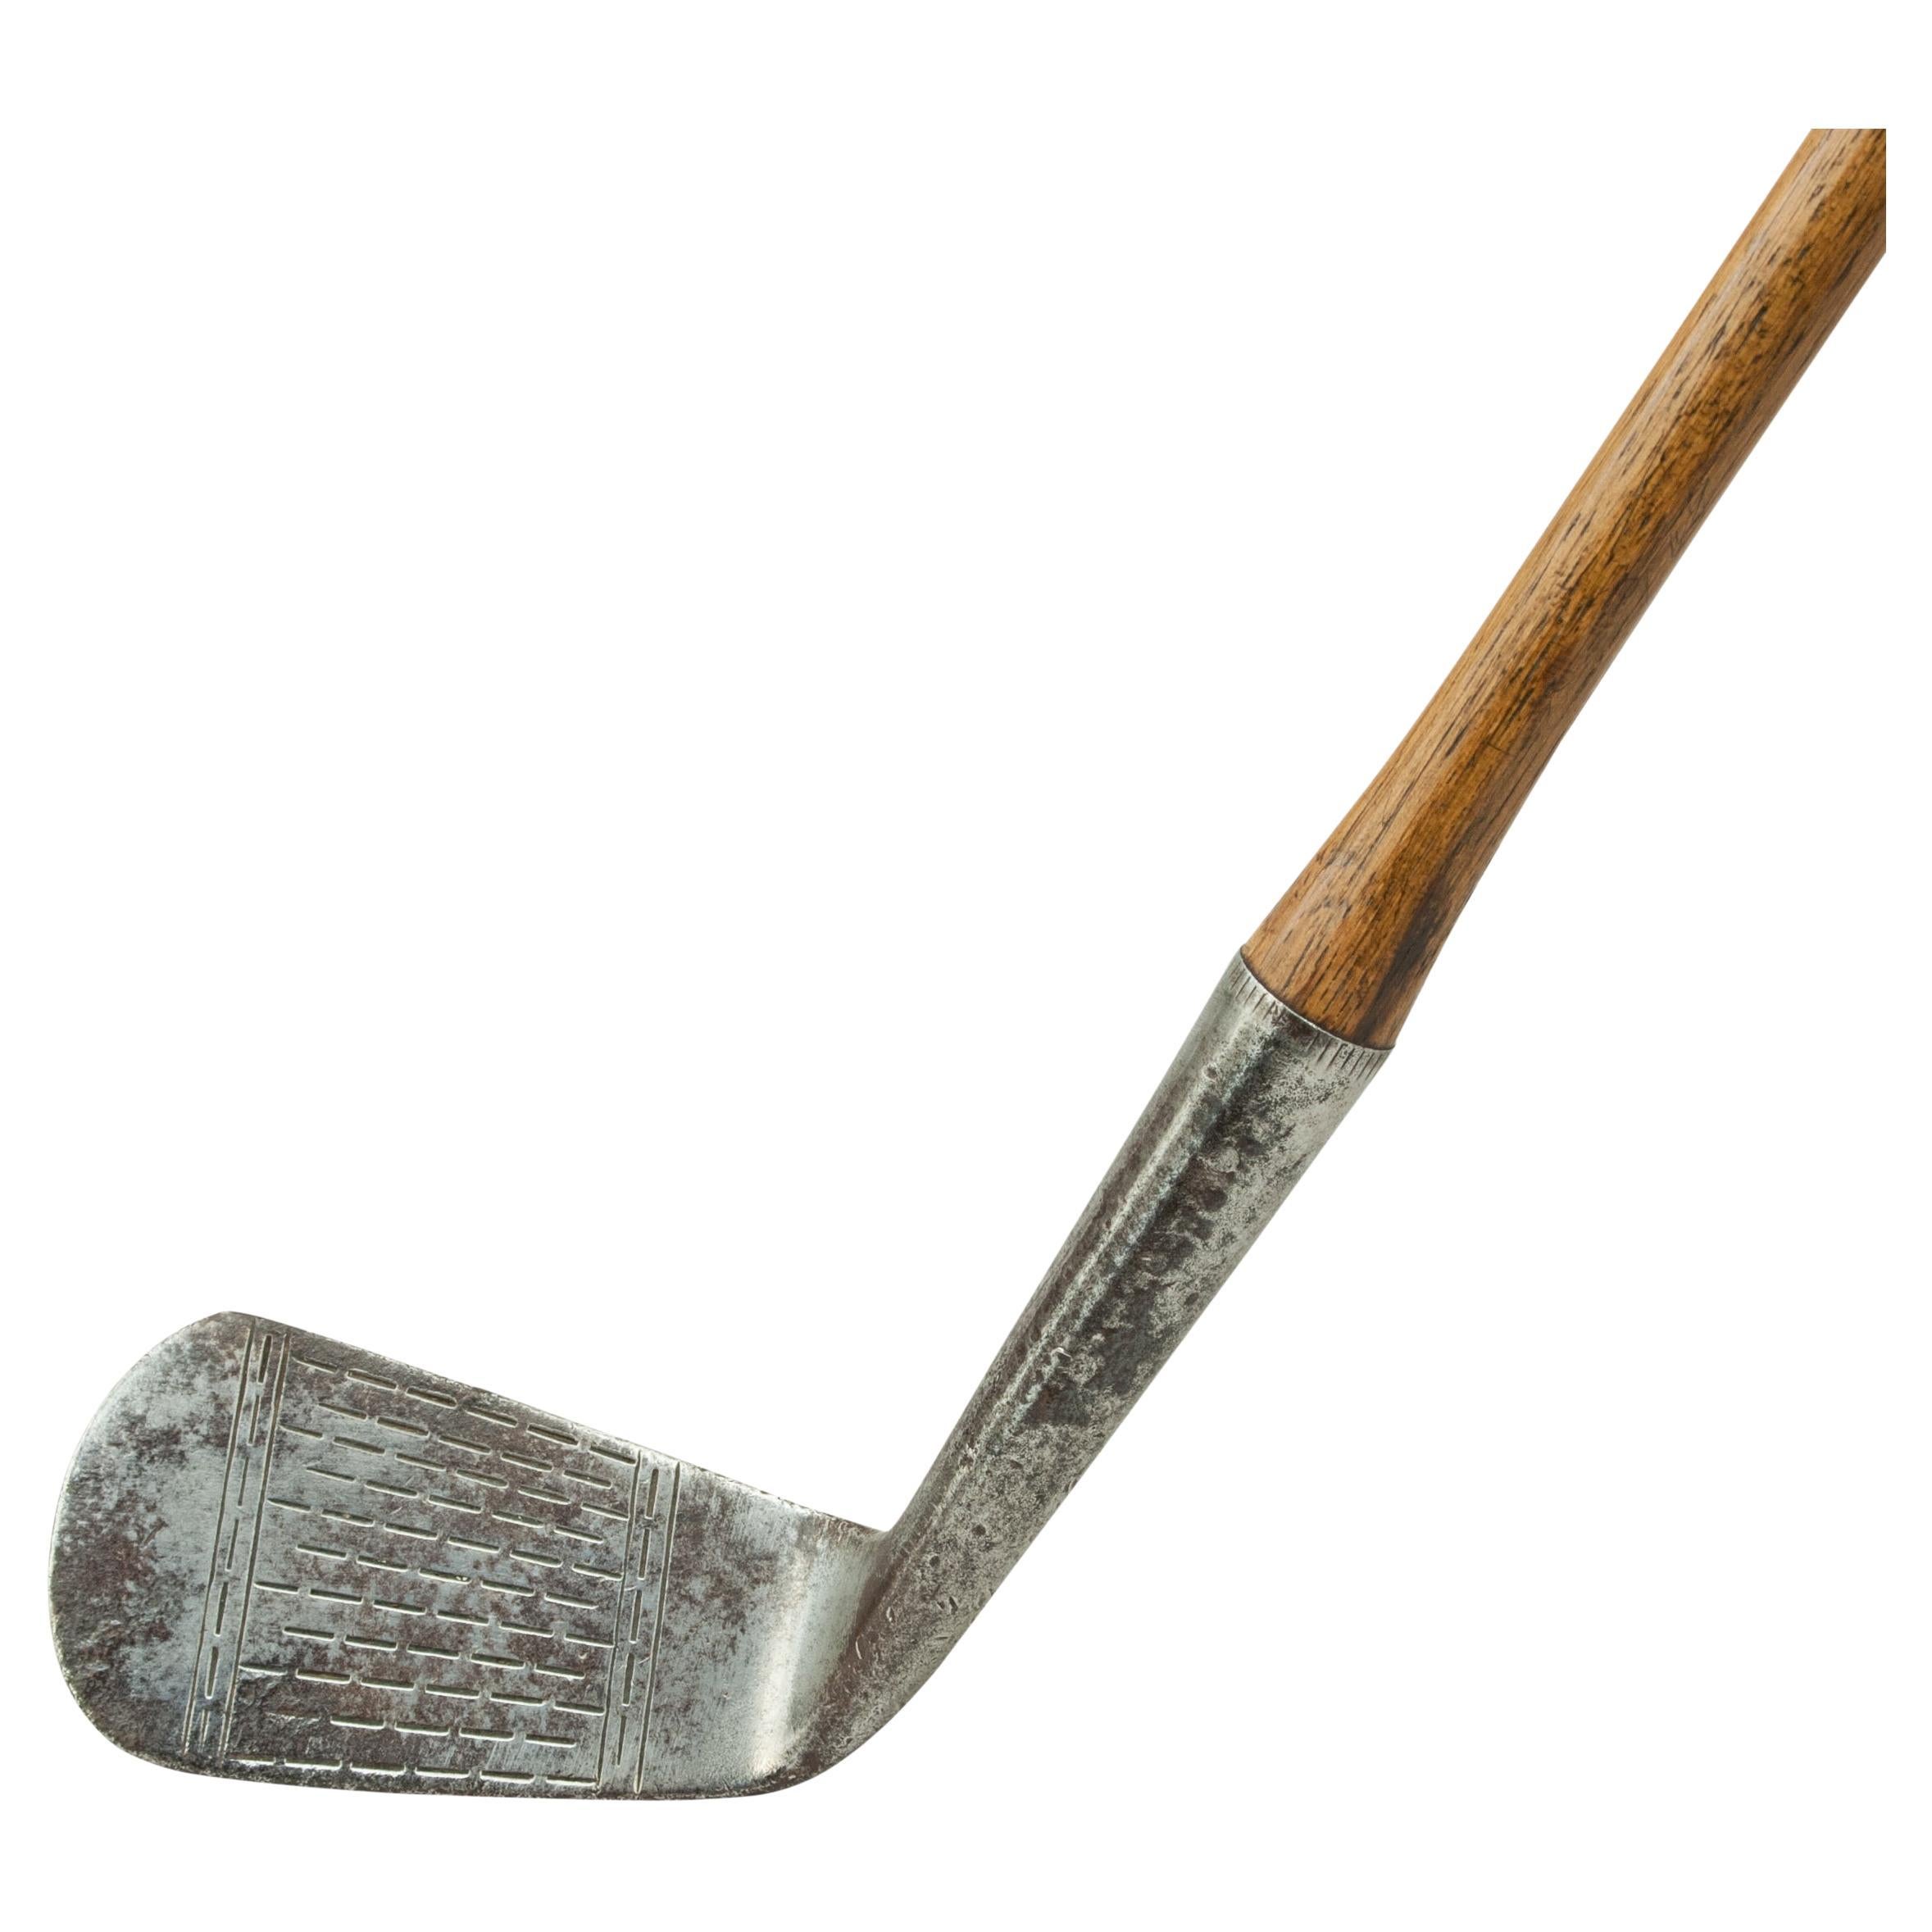 Antique Golf Club, Hickory Wood with Fancy Face For Sale at 1stDibs